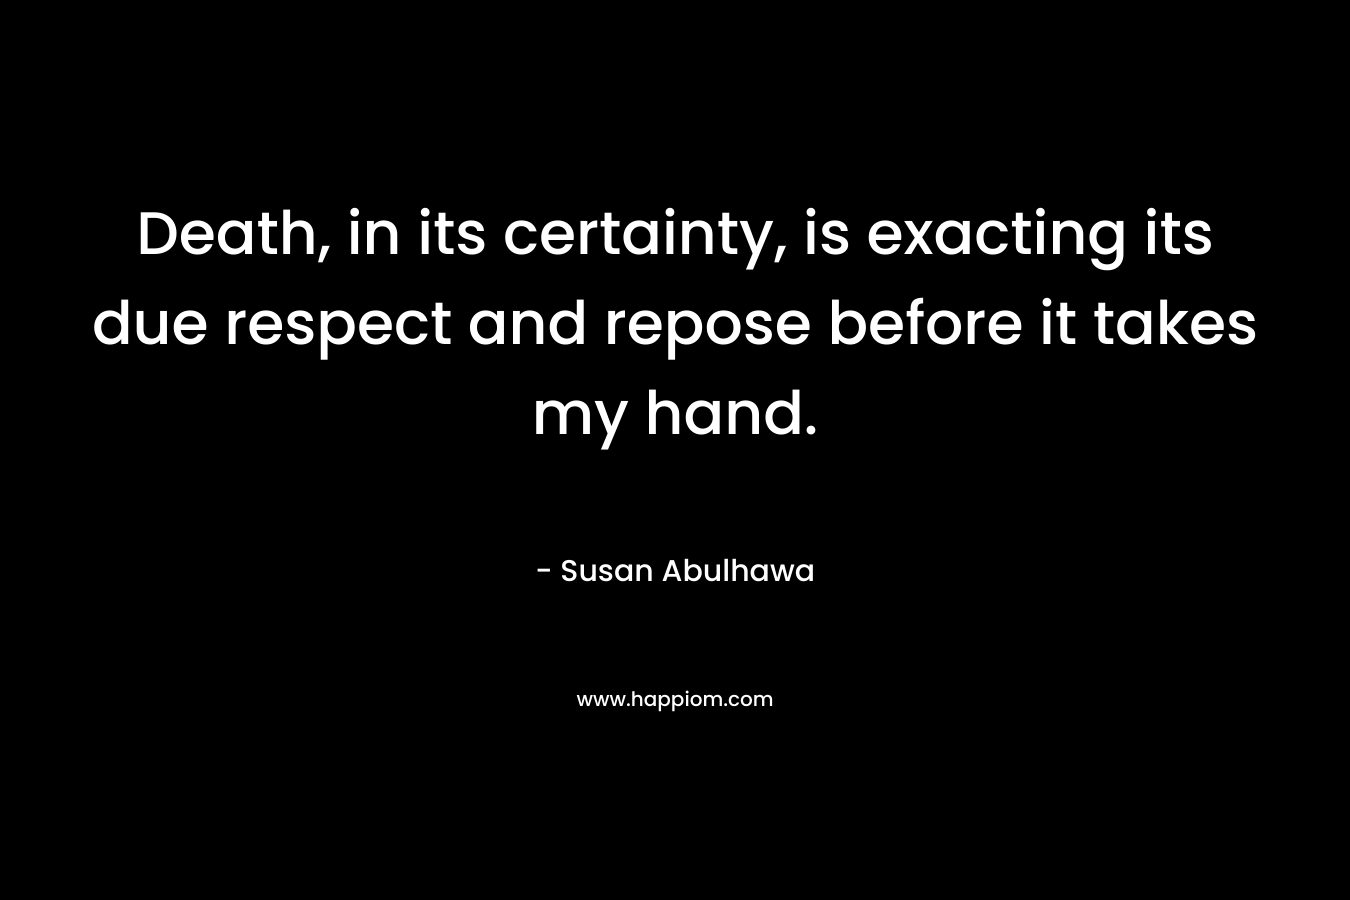 Death, in its certainty, is exacting its due respect and repose before it takes my hand.